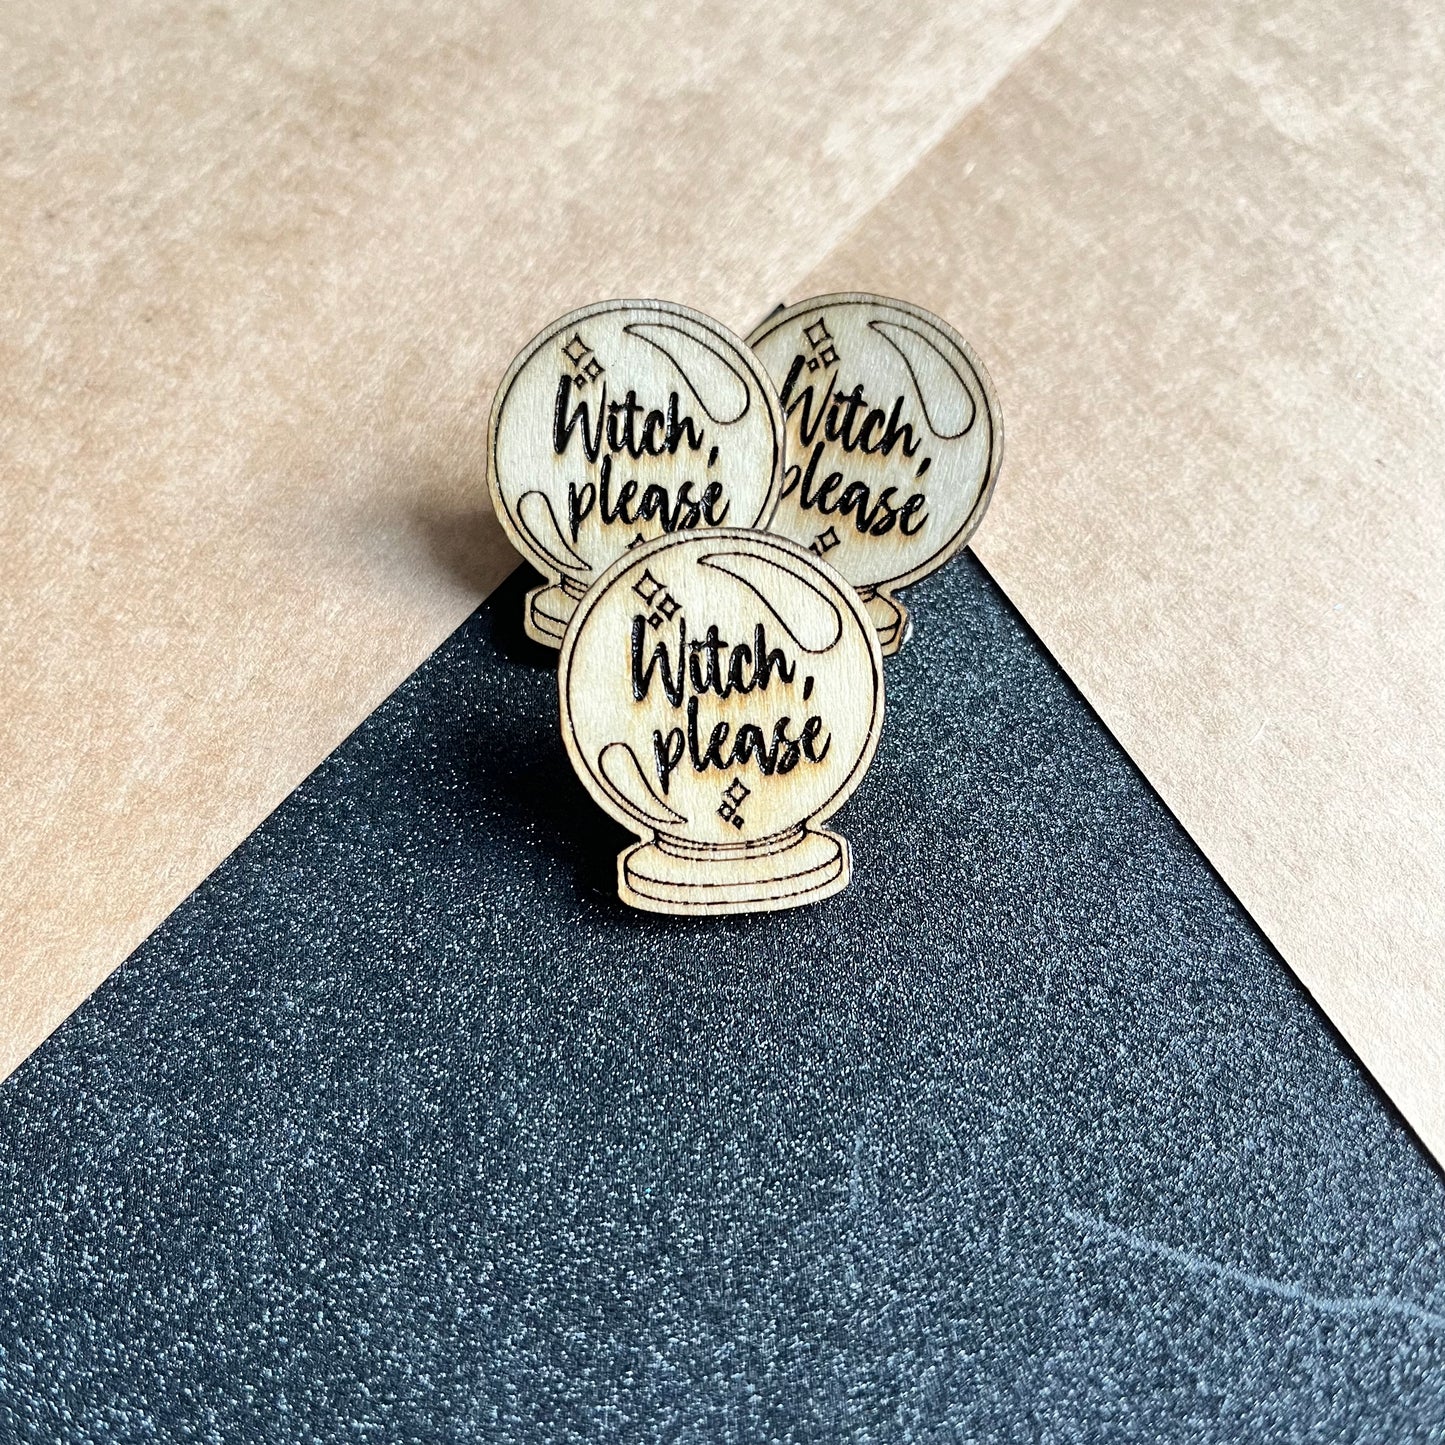 Wooden Pin Badge - ‘Witch, Please’ Crystal Ball - Halloween Accessory